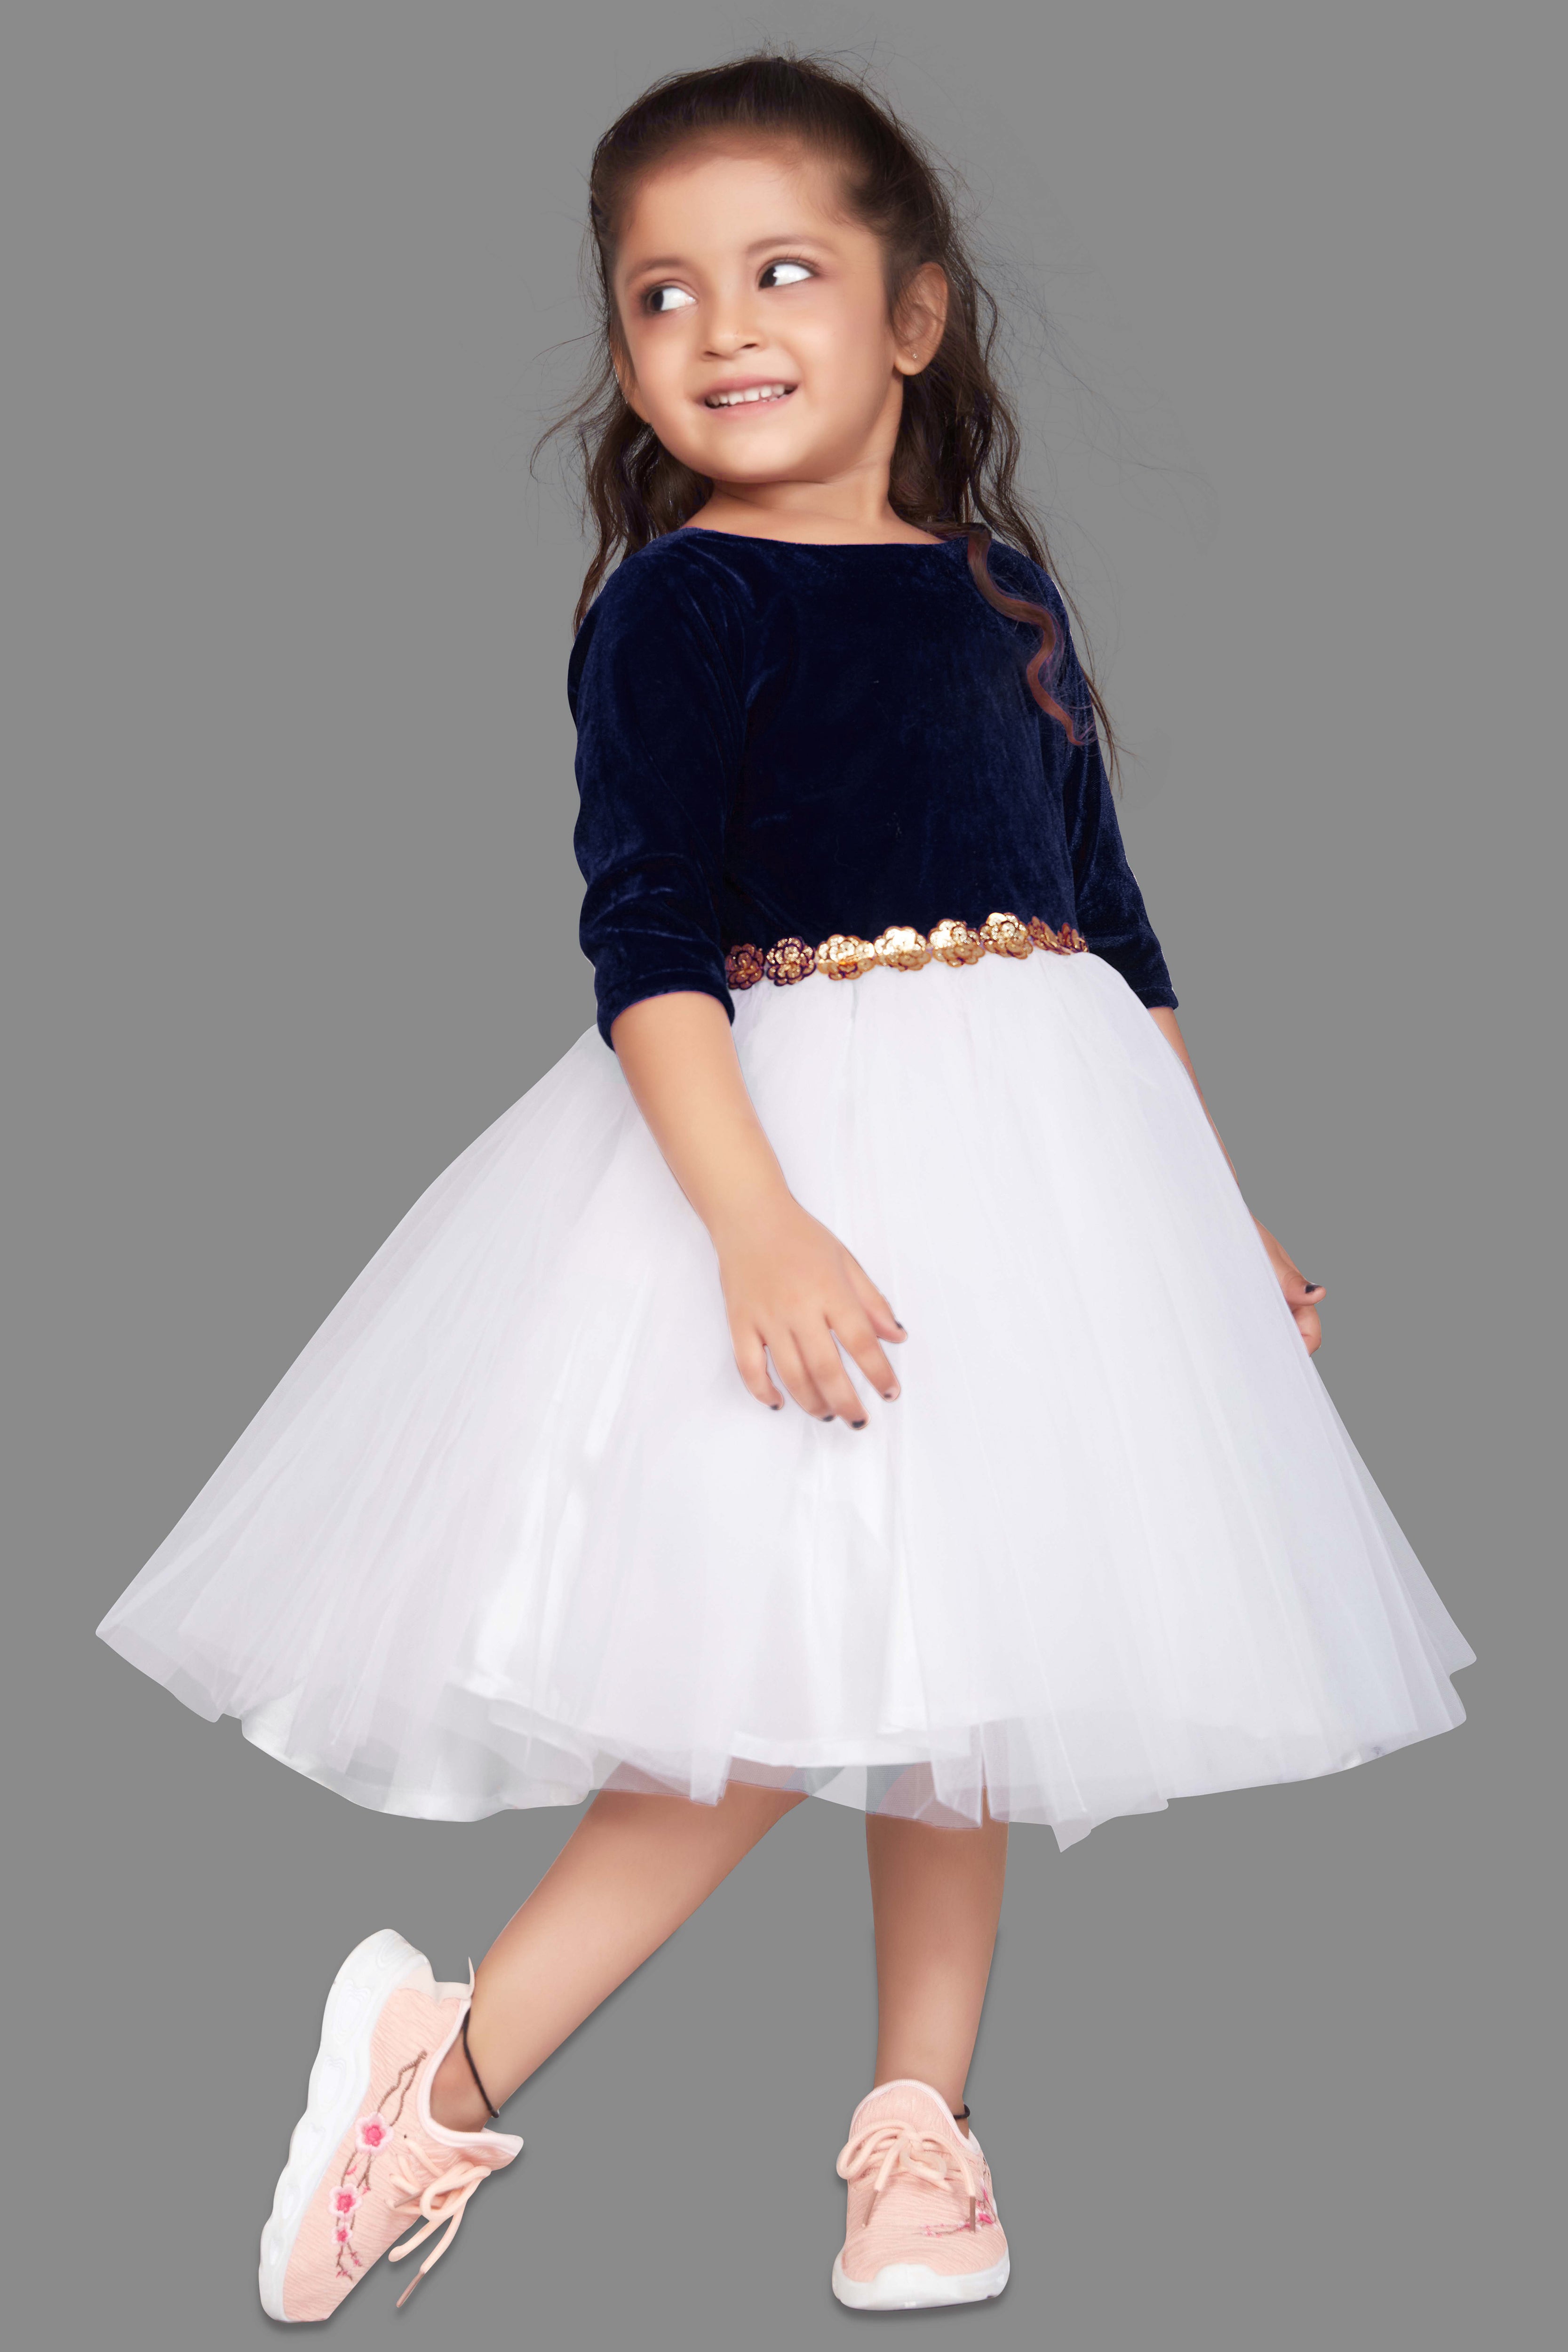 Lovely-Shop Girls Dress Children's Clothing Children's Elegant Princess  Dress Baby Big Bow Party Dress,As Picture1,7 : Amazon.in: Fashion